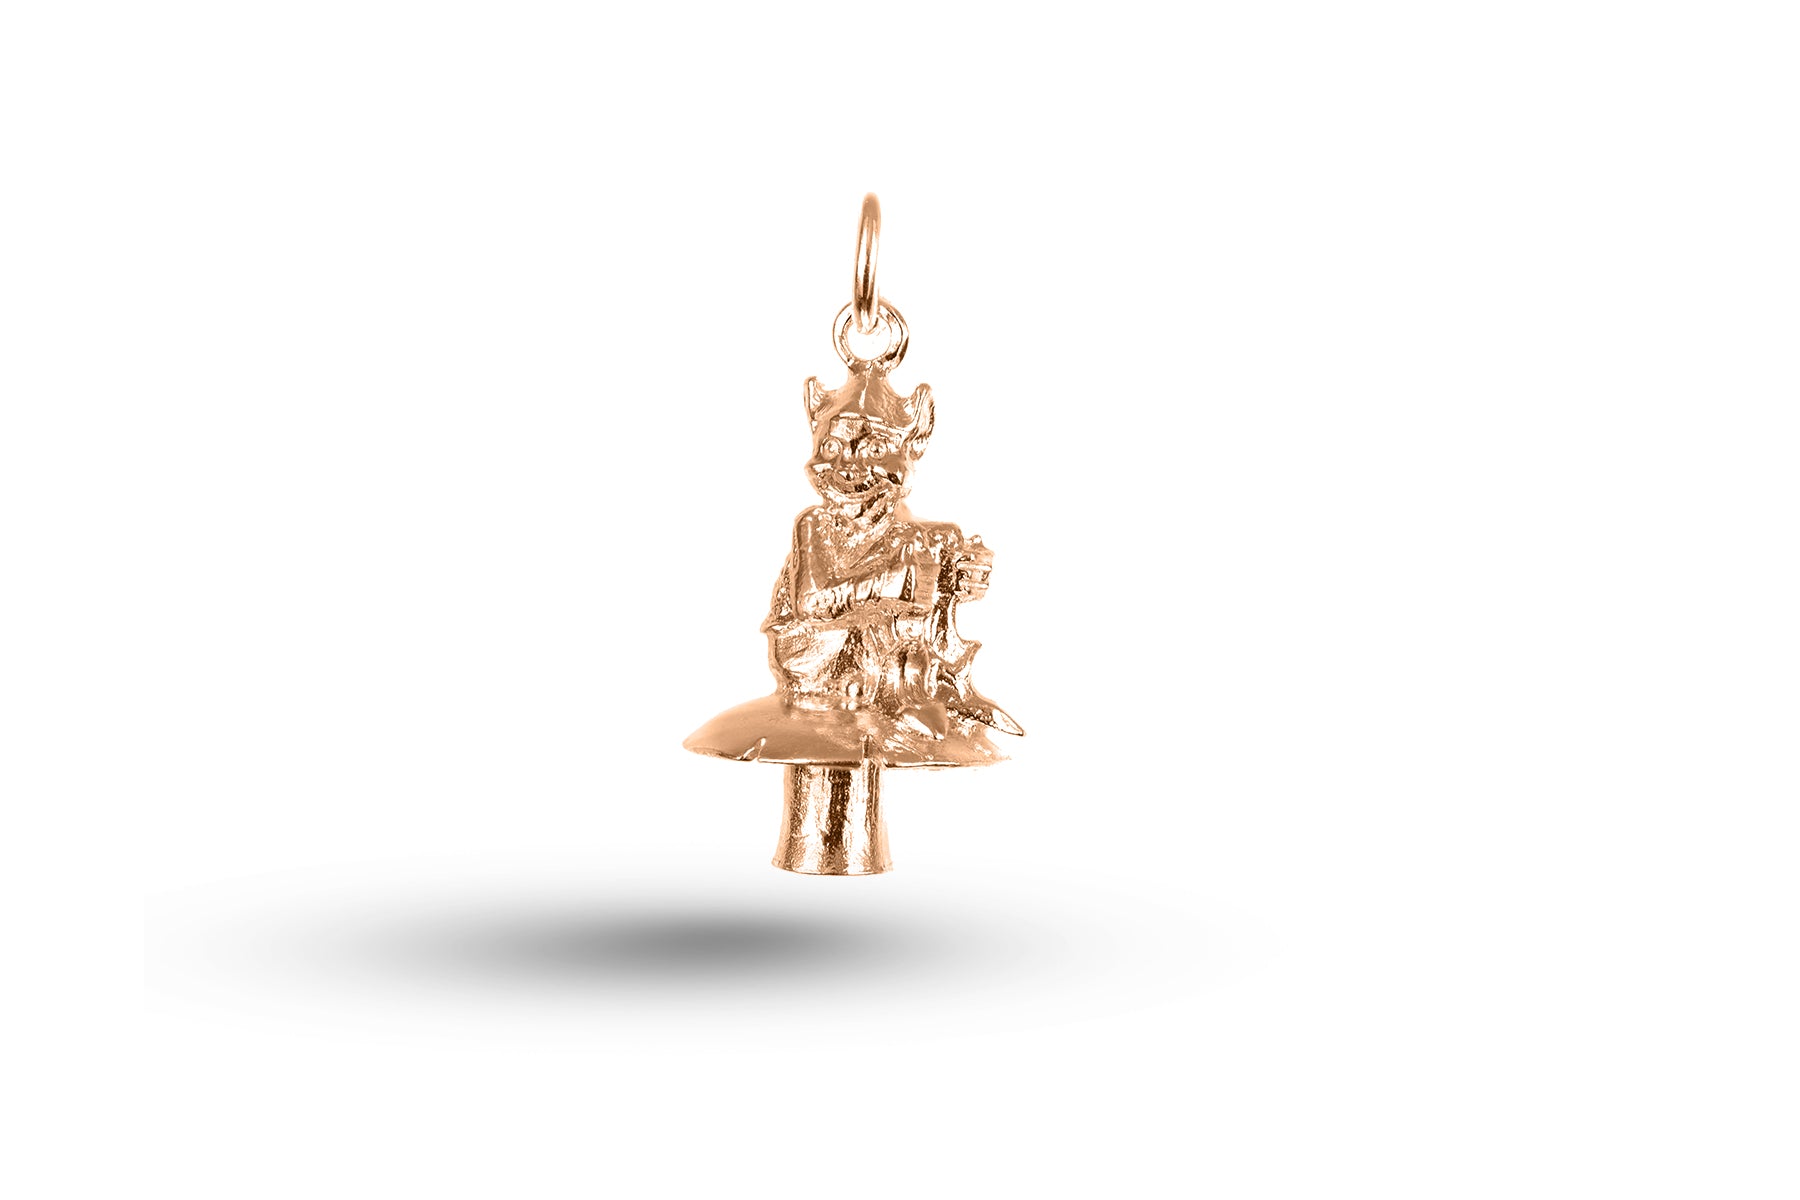 Rose gold Pixie on Toadstool charm.